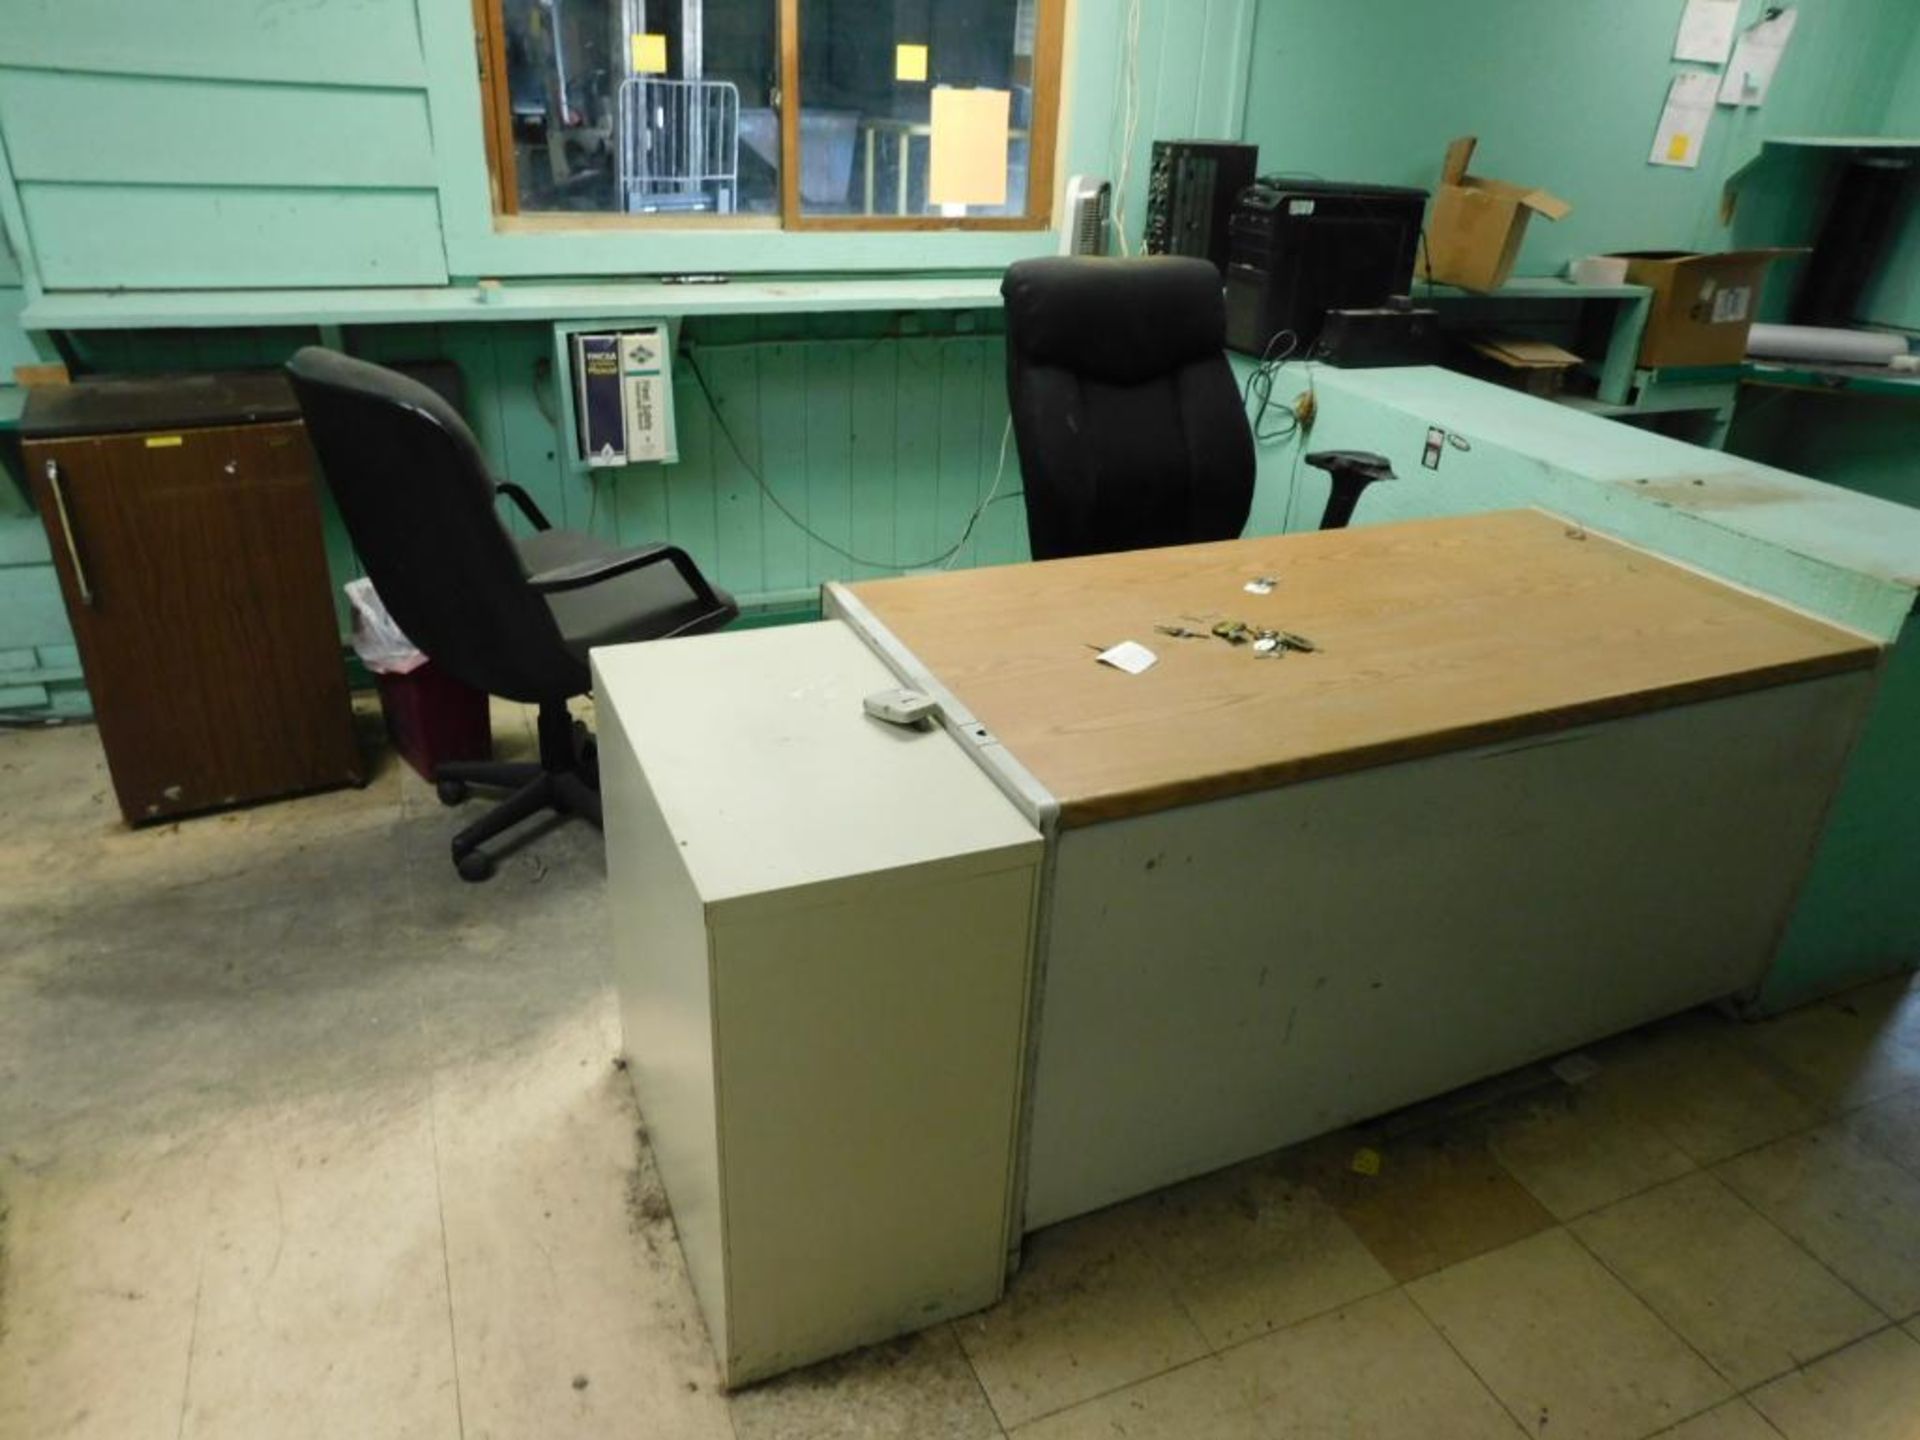 LOT: Contents of Offices: Desks, Chairs, File Cabinets, Monitors (NO TOWERS OR PRINTERS) - Image 7 of 11